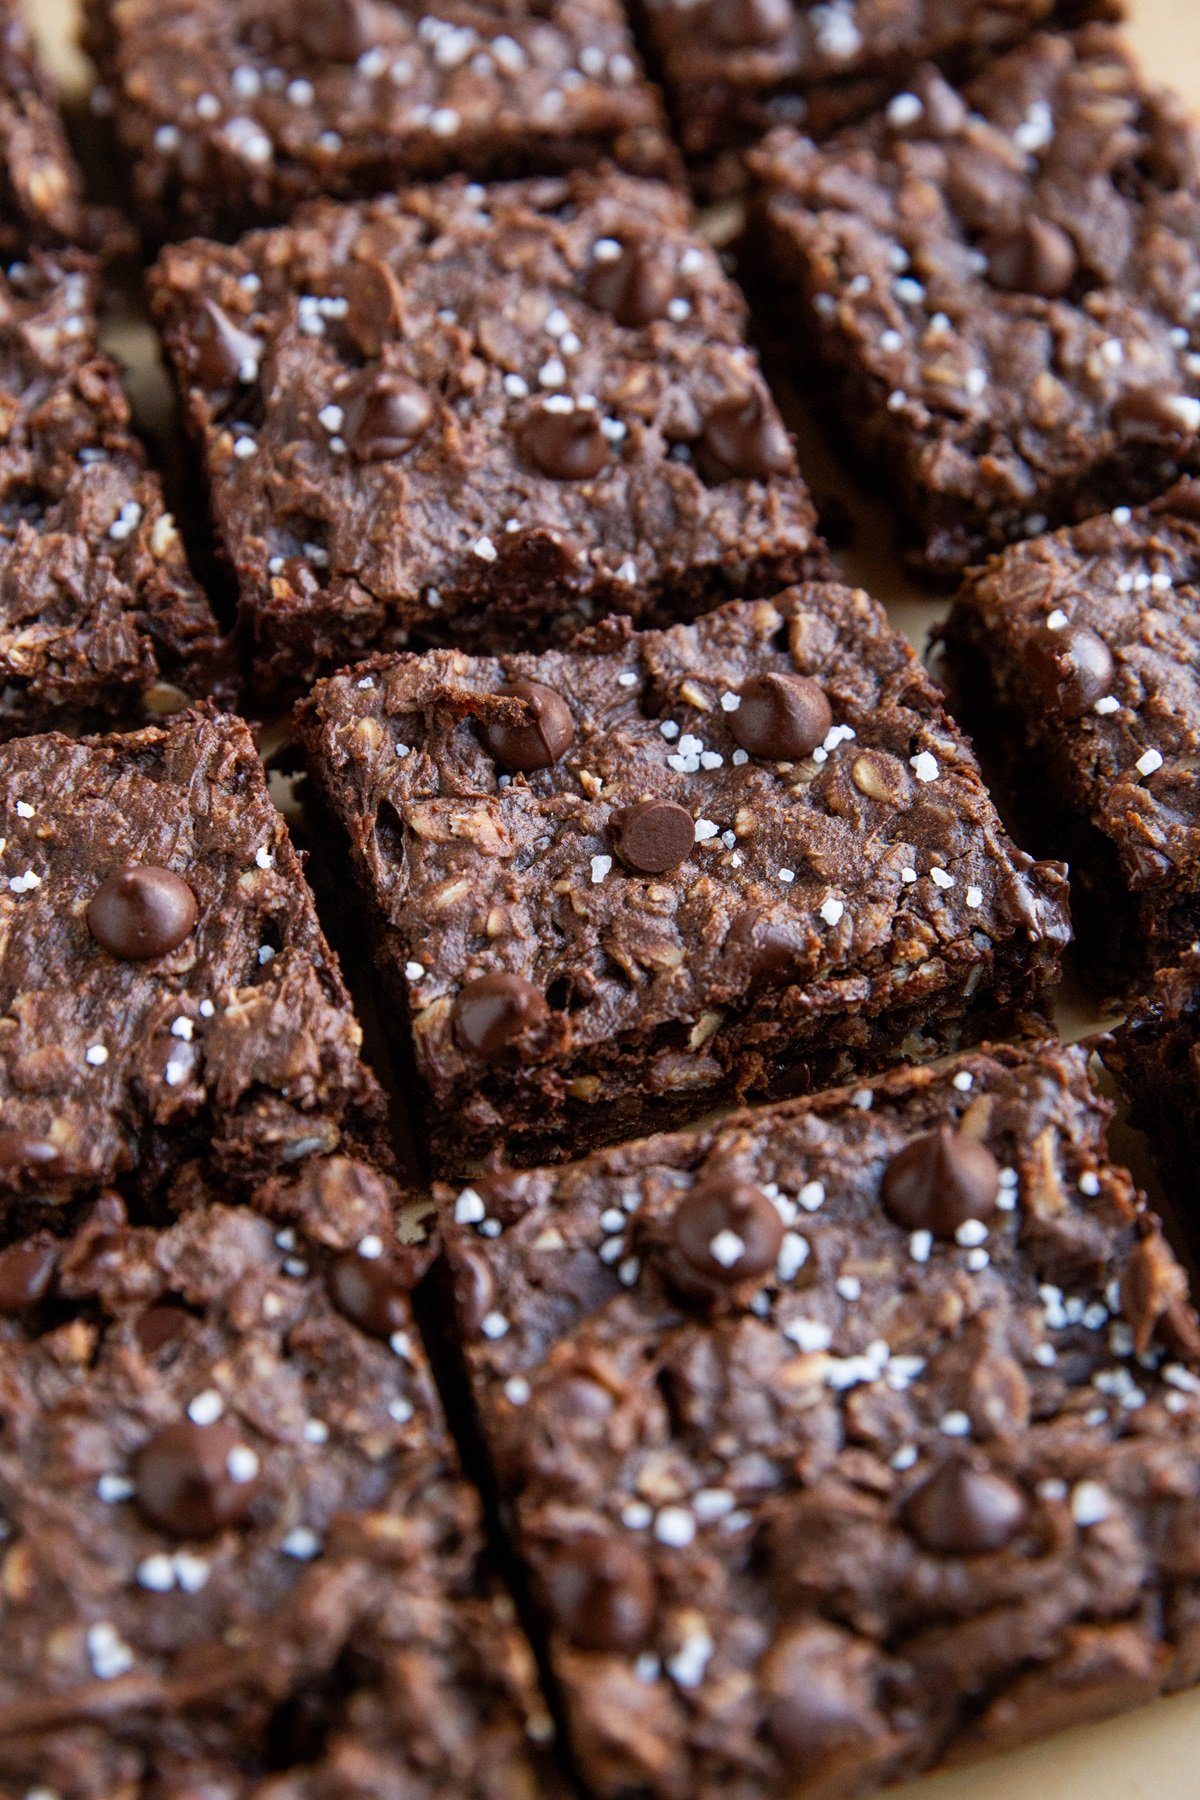 Chocolate peanut butter oatmeal cookie bars cut into individual squares